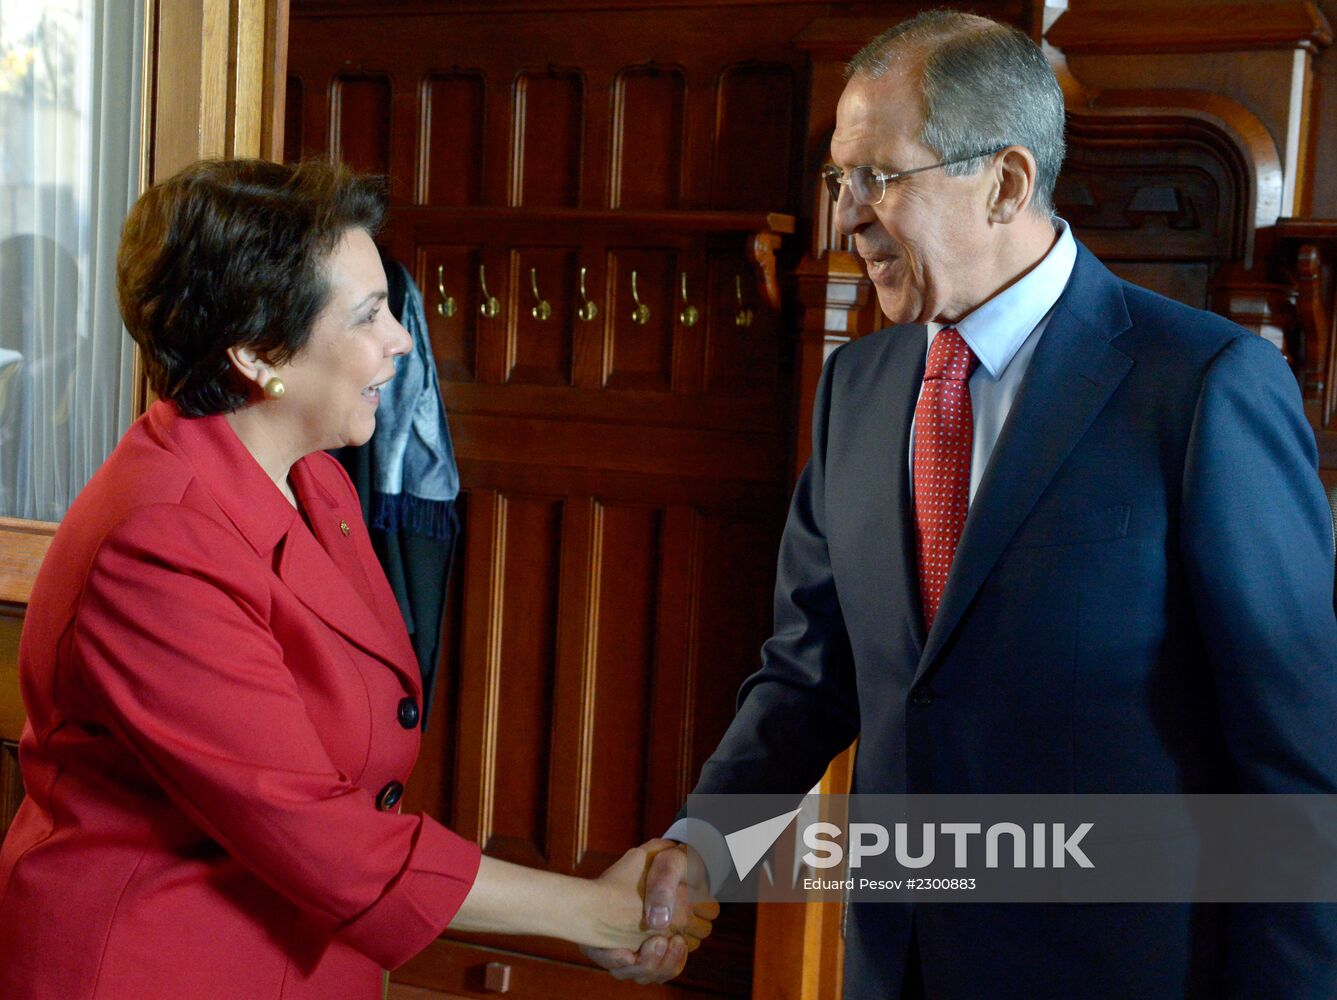 Foreign ministers of Russia and Honduras meet in Moscow